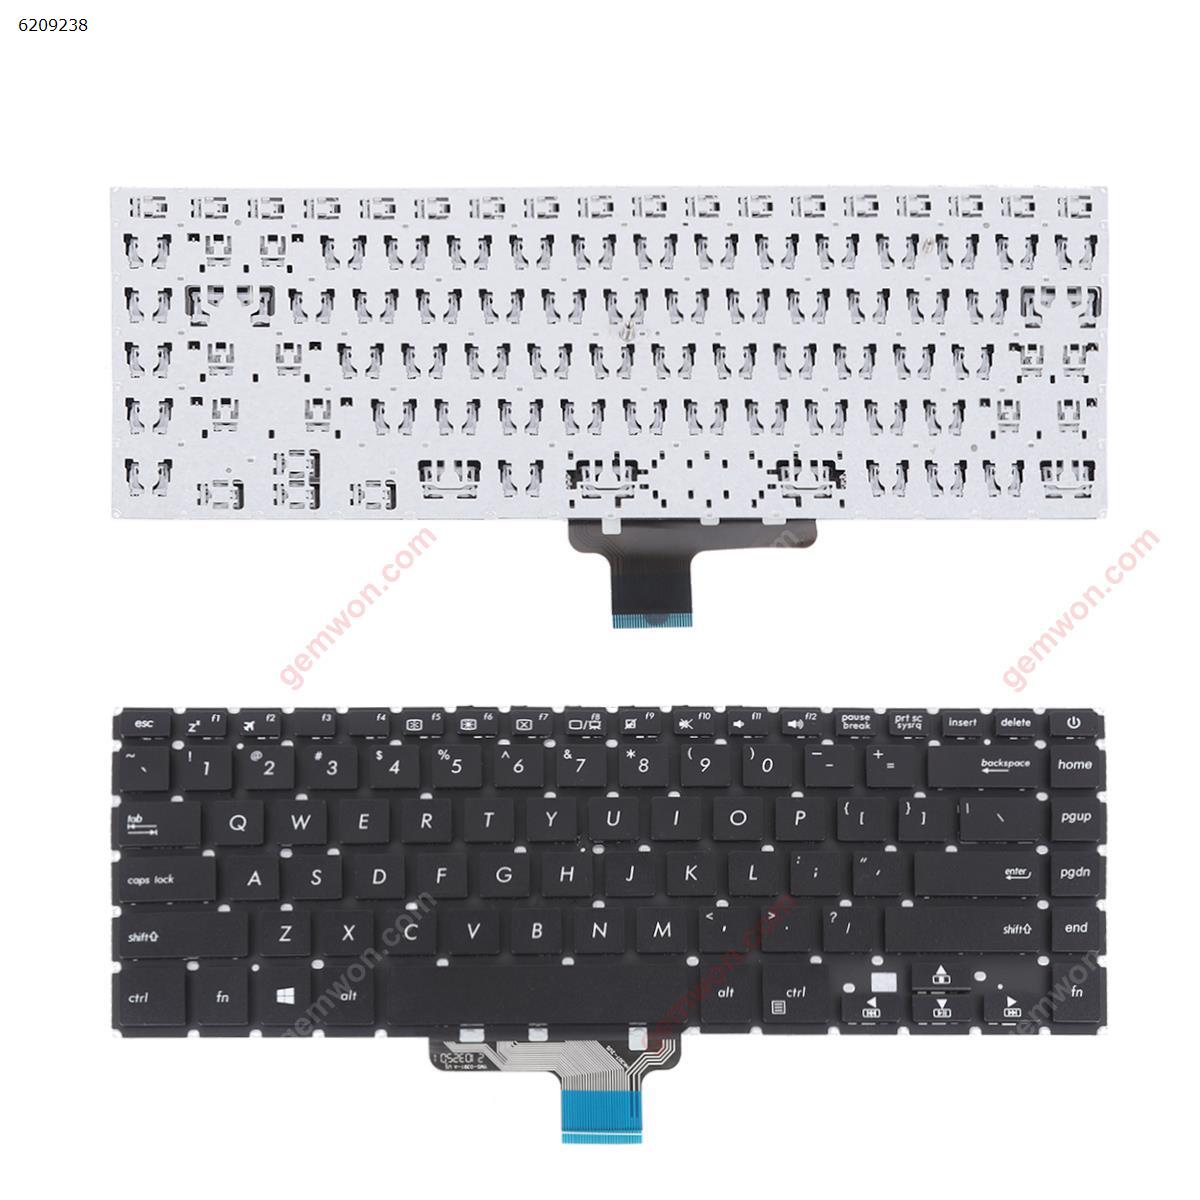 NEW ASUS US English Keyboard for Asus Vivobook S15 S510UA S510UN S510UQ S510UR 